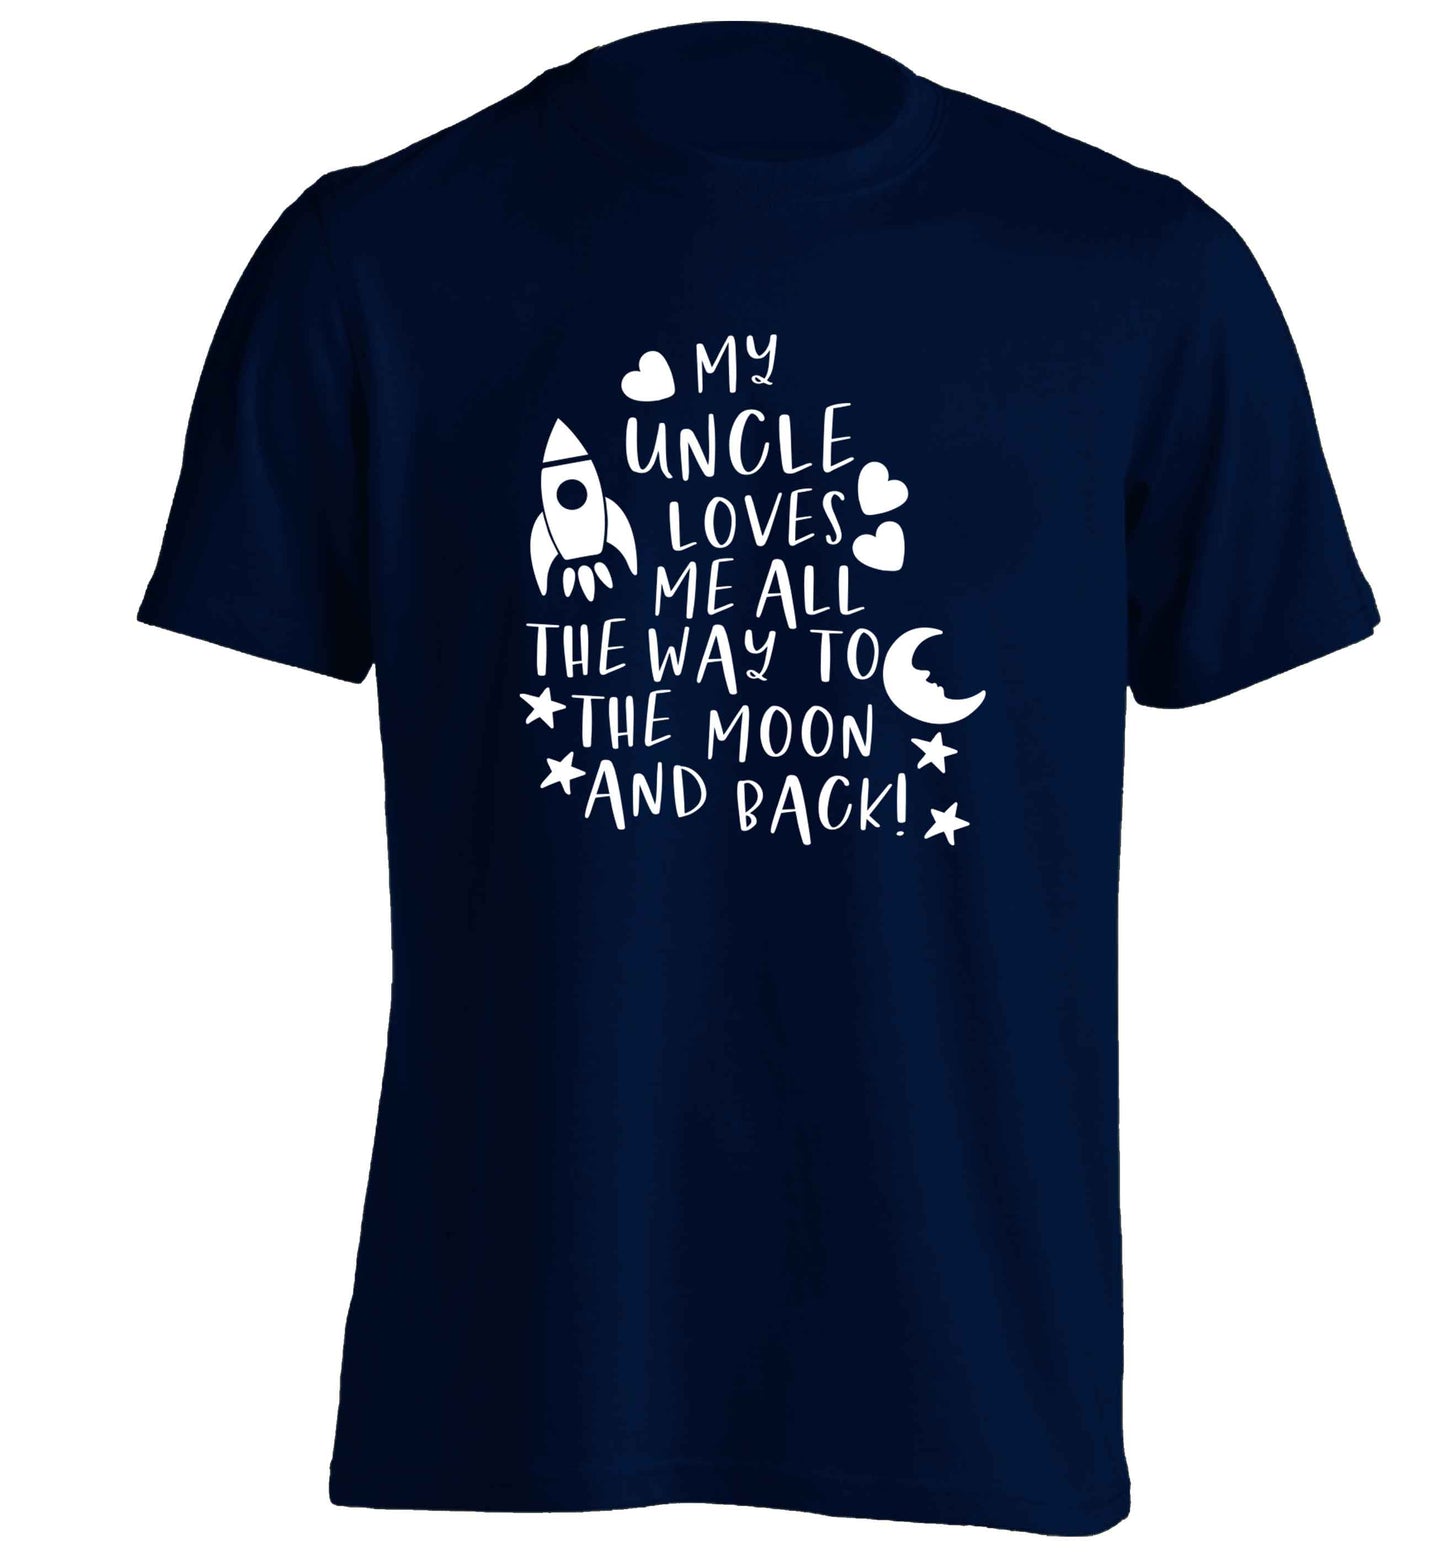 My uncle loves me all the way to the moon and back adults unisex navy Tshirt 2XL